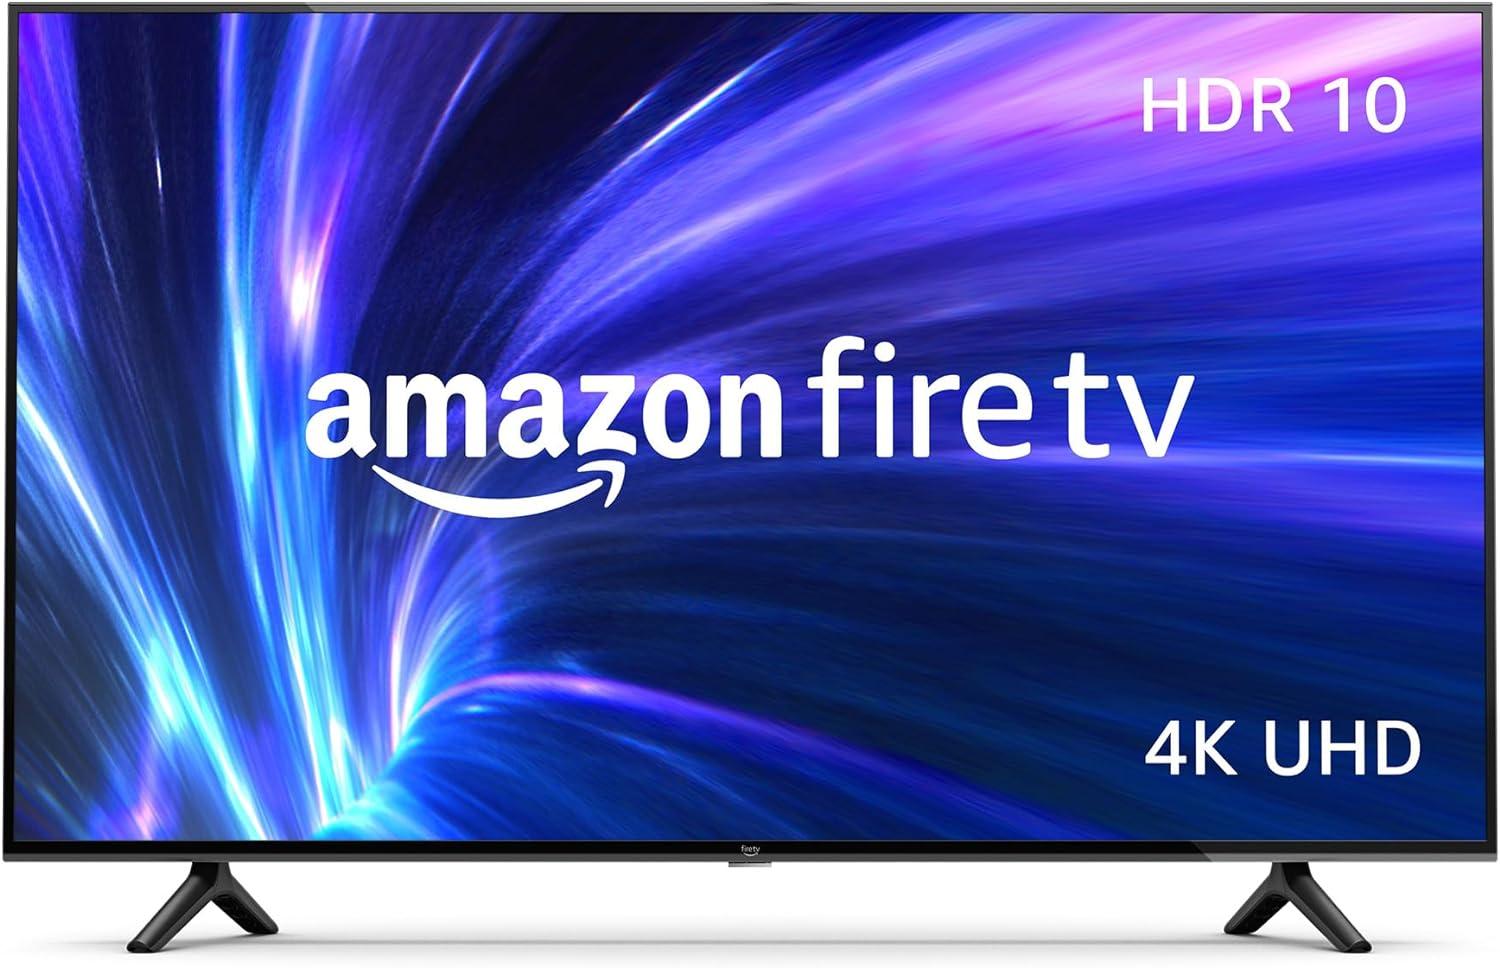 43in Amazon Fire TV 4-Series 4K UHD Smart TV Refurbished for $149.99